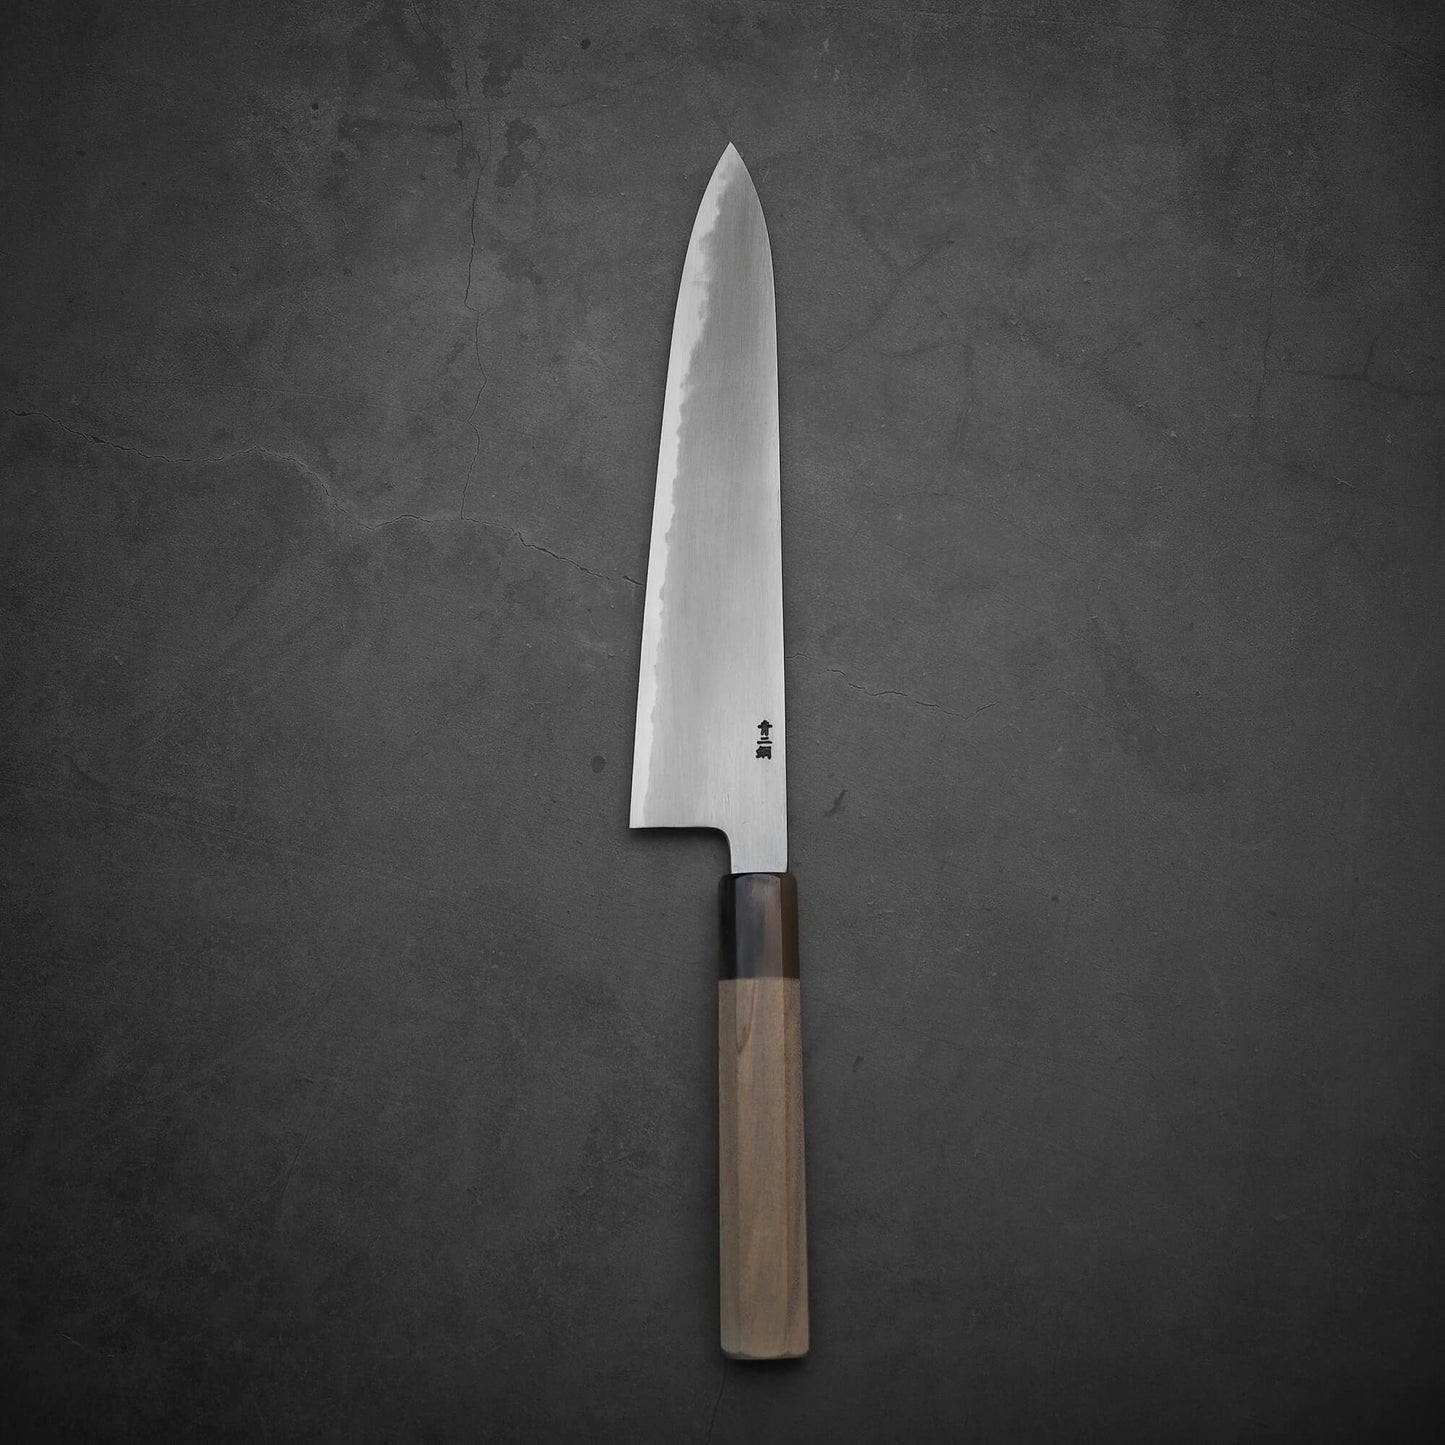 Top view of Nakagawa aogami#2 gyuto in vertical position. Image shows the left side of the knife